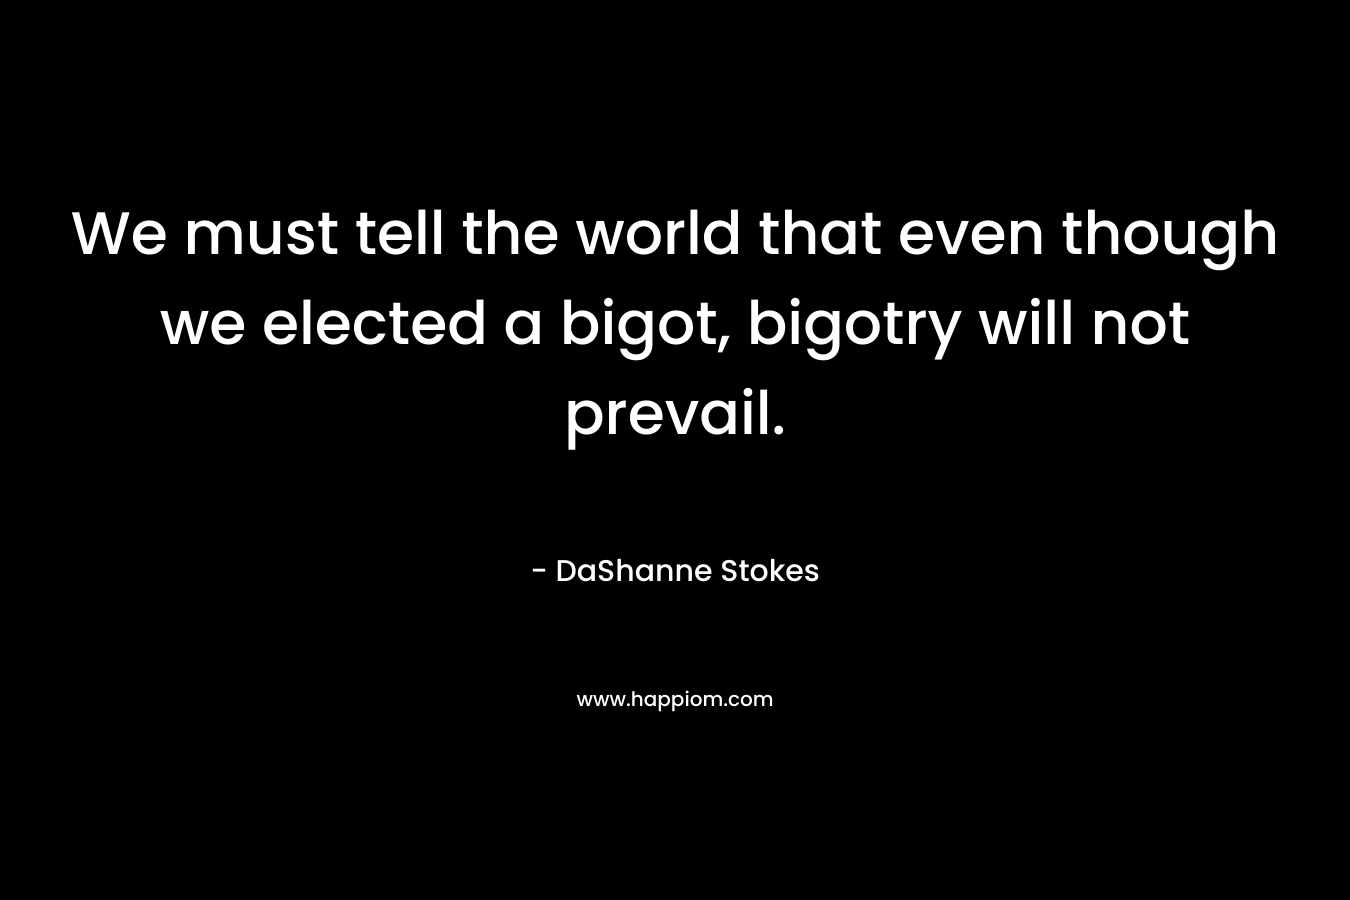 We must tell the world that even though we elected a bigot, bigotry will not prevail.